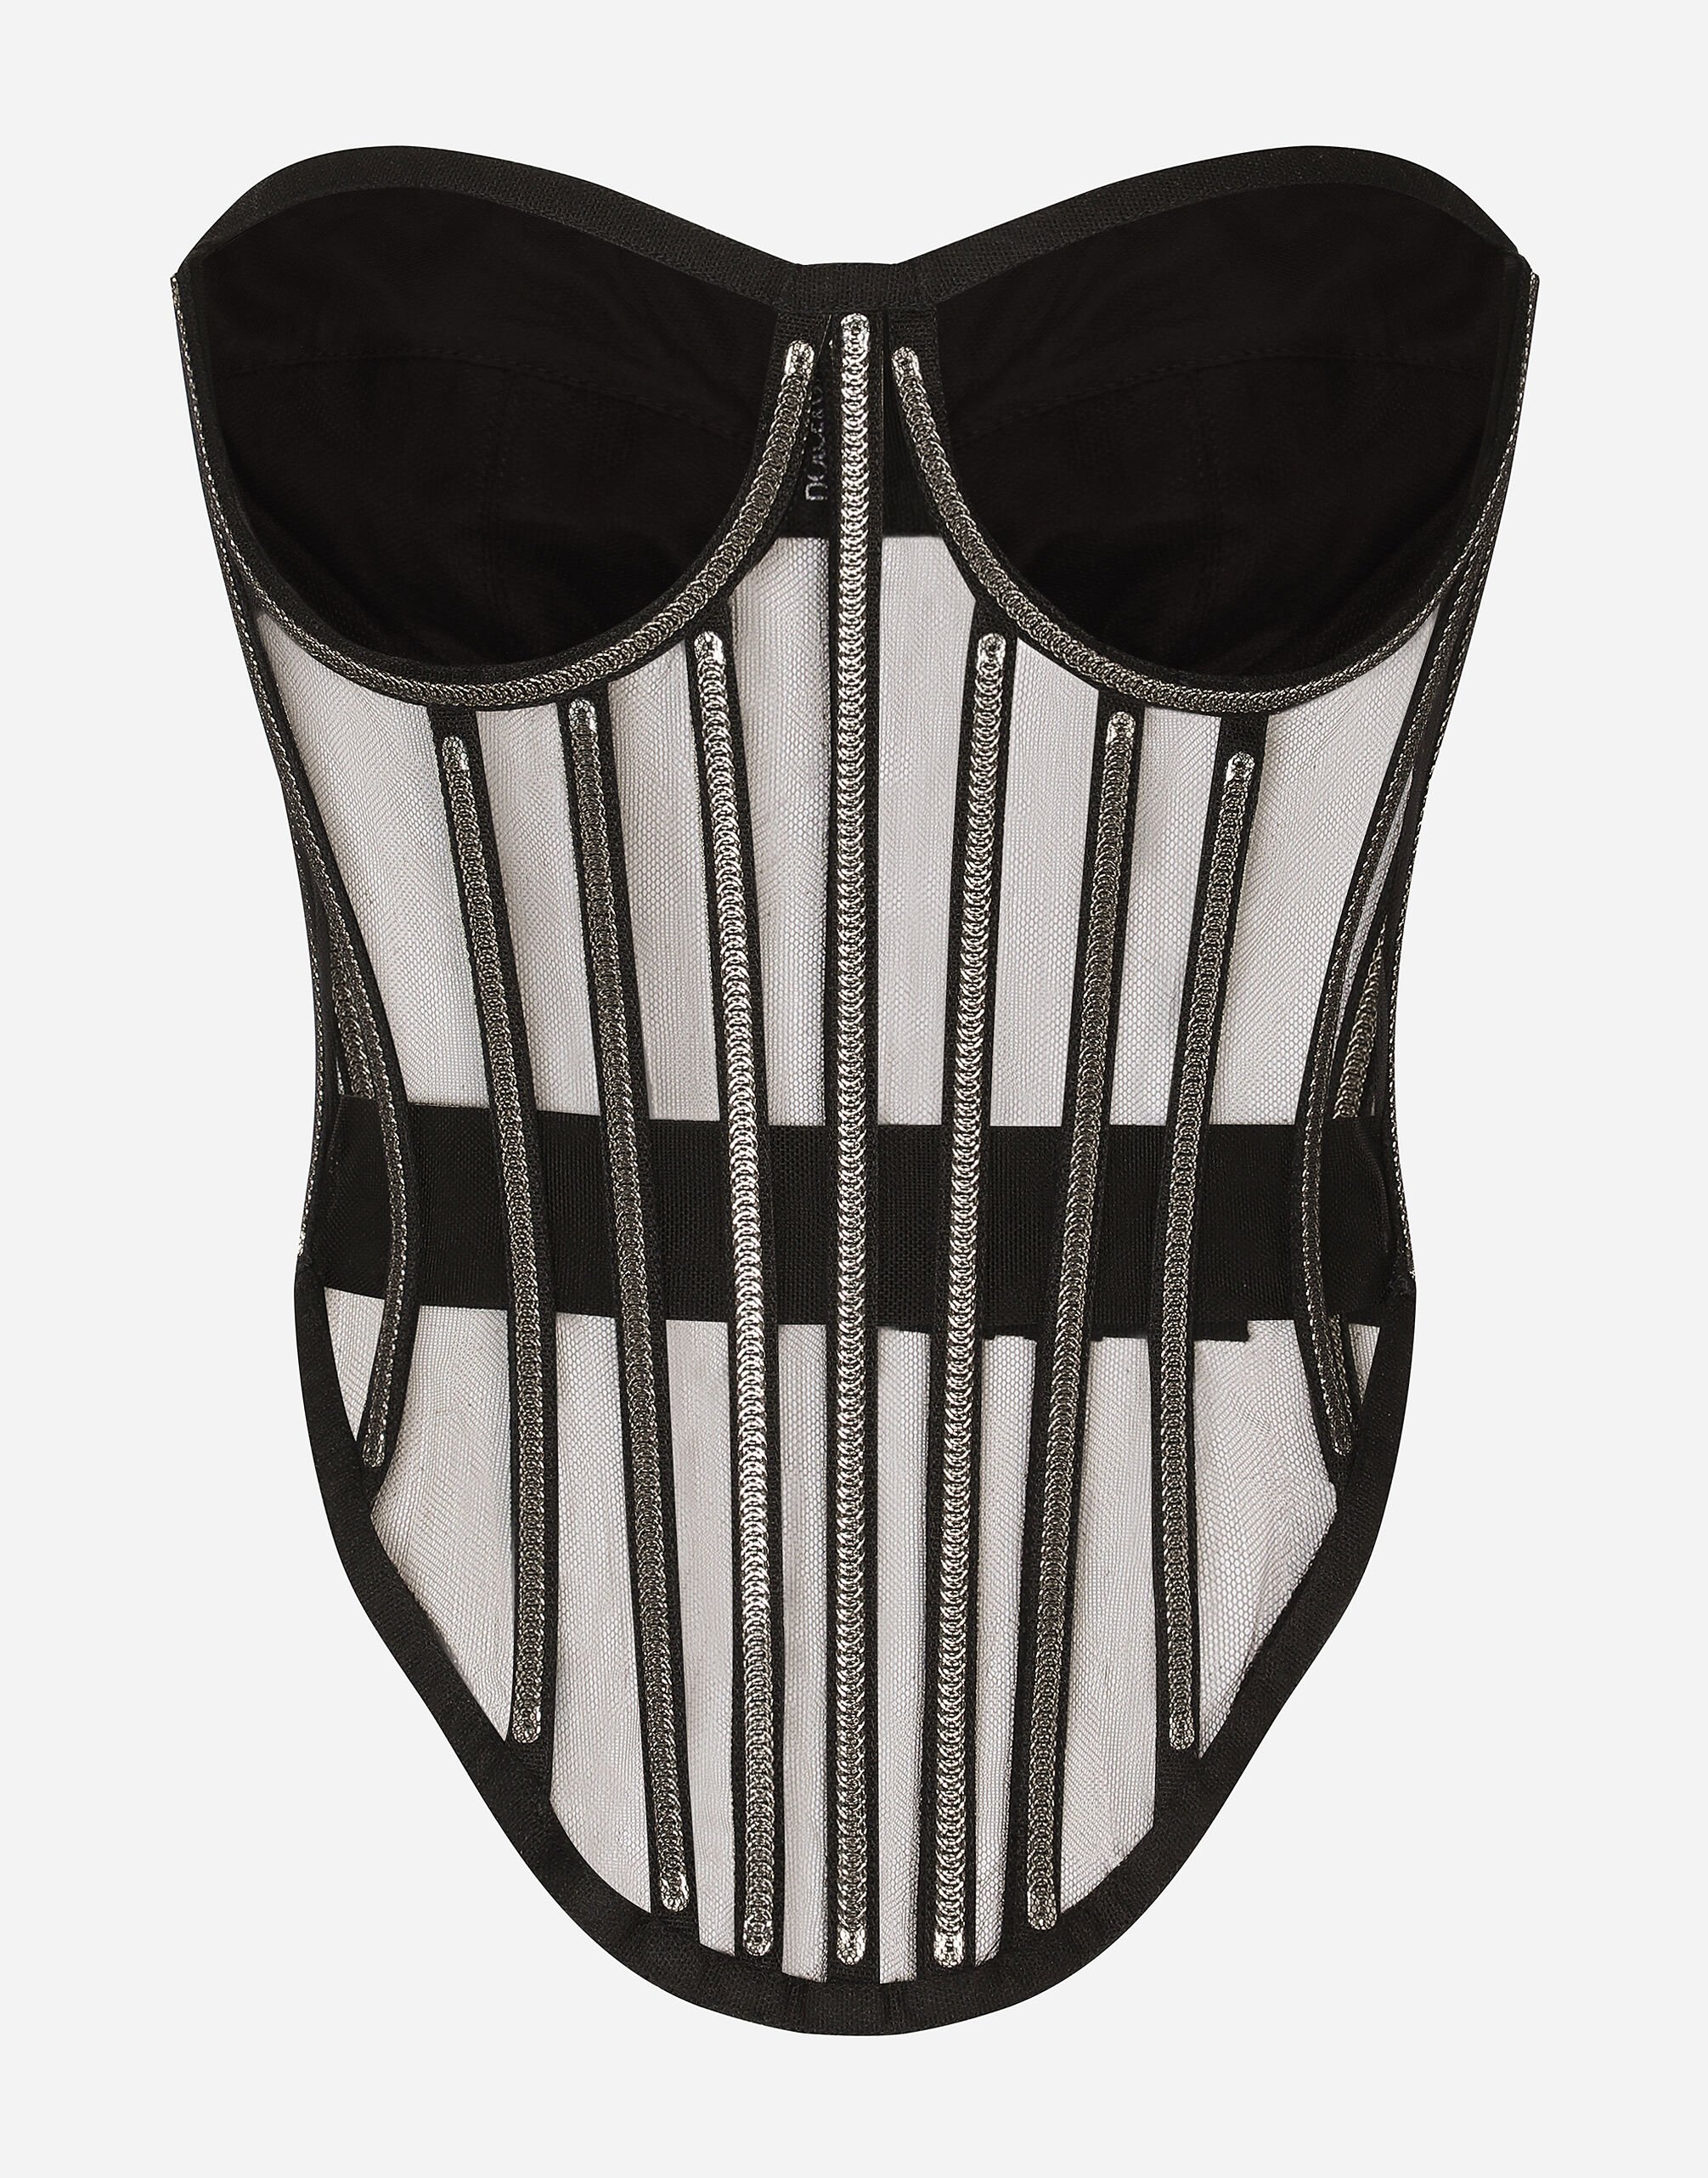 ${brand} KIM DOLCE&GABBANA Tulle corset with boning and molded cups ${colorDescription} ${masterID}